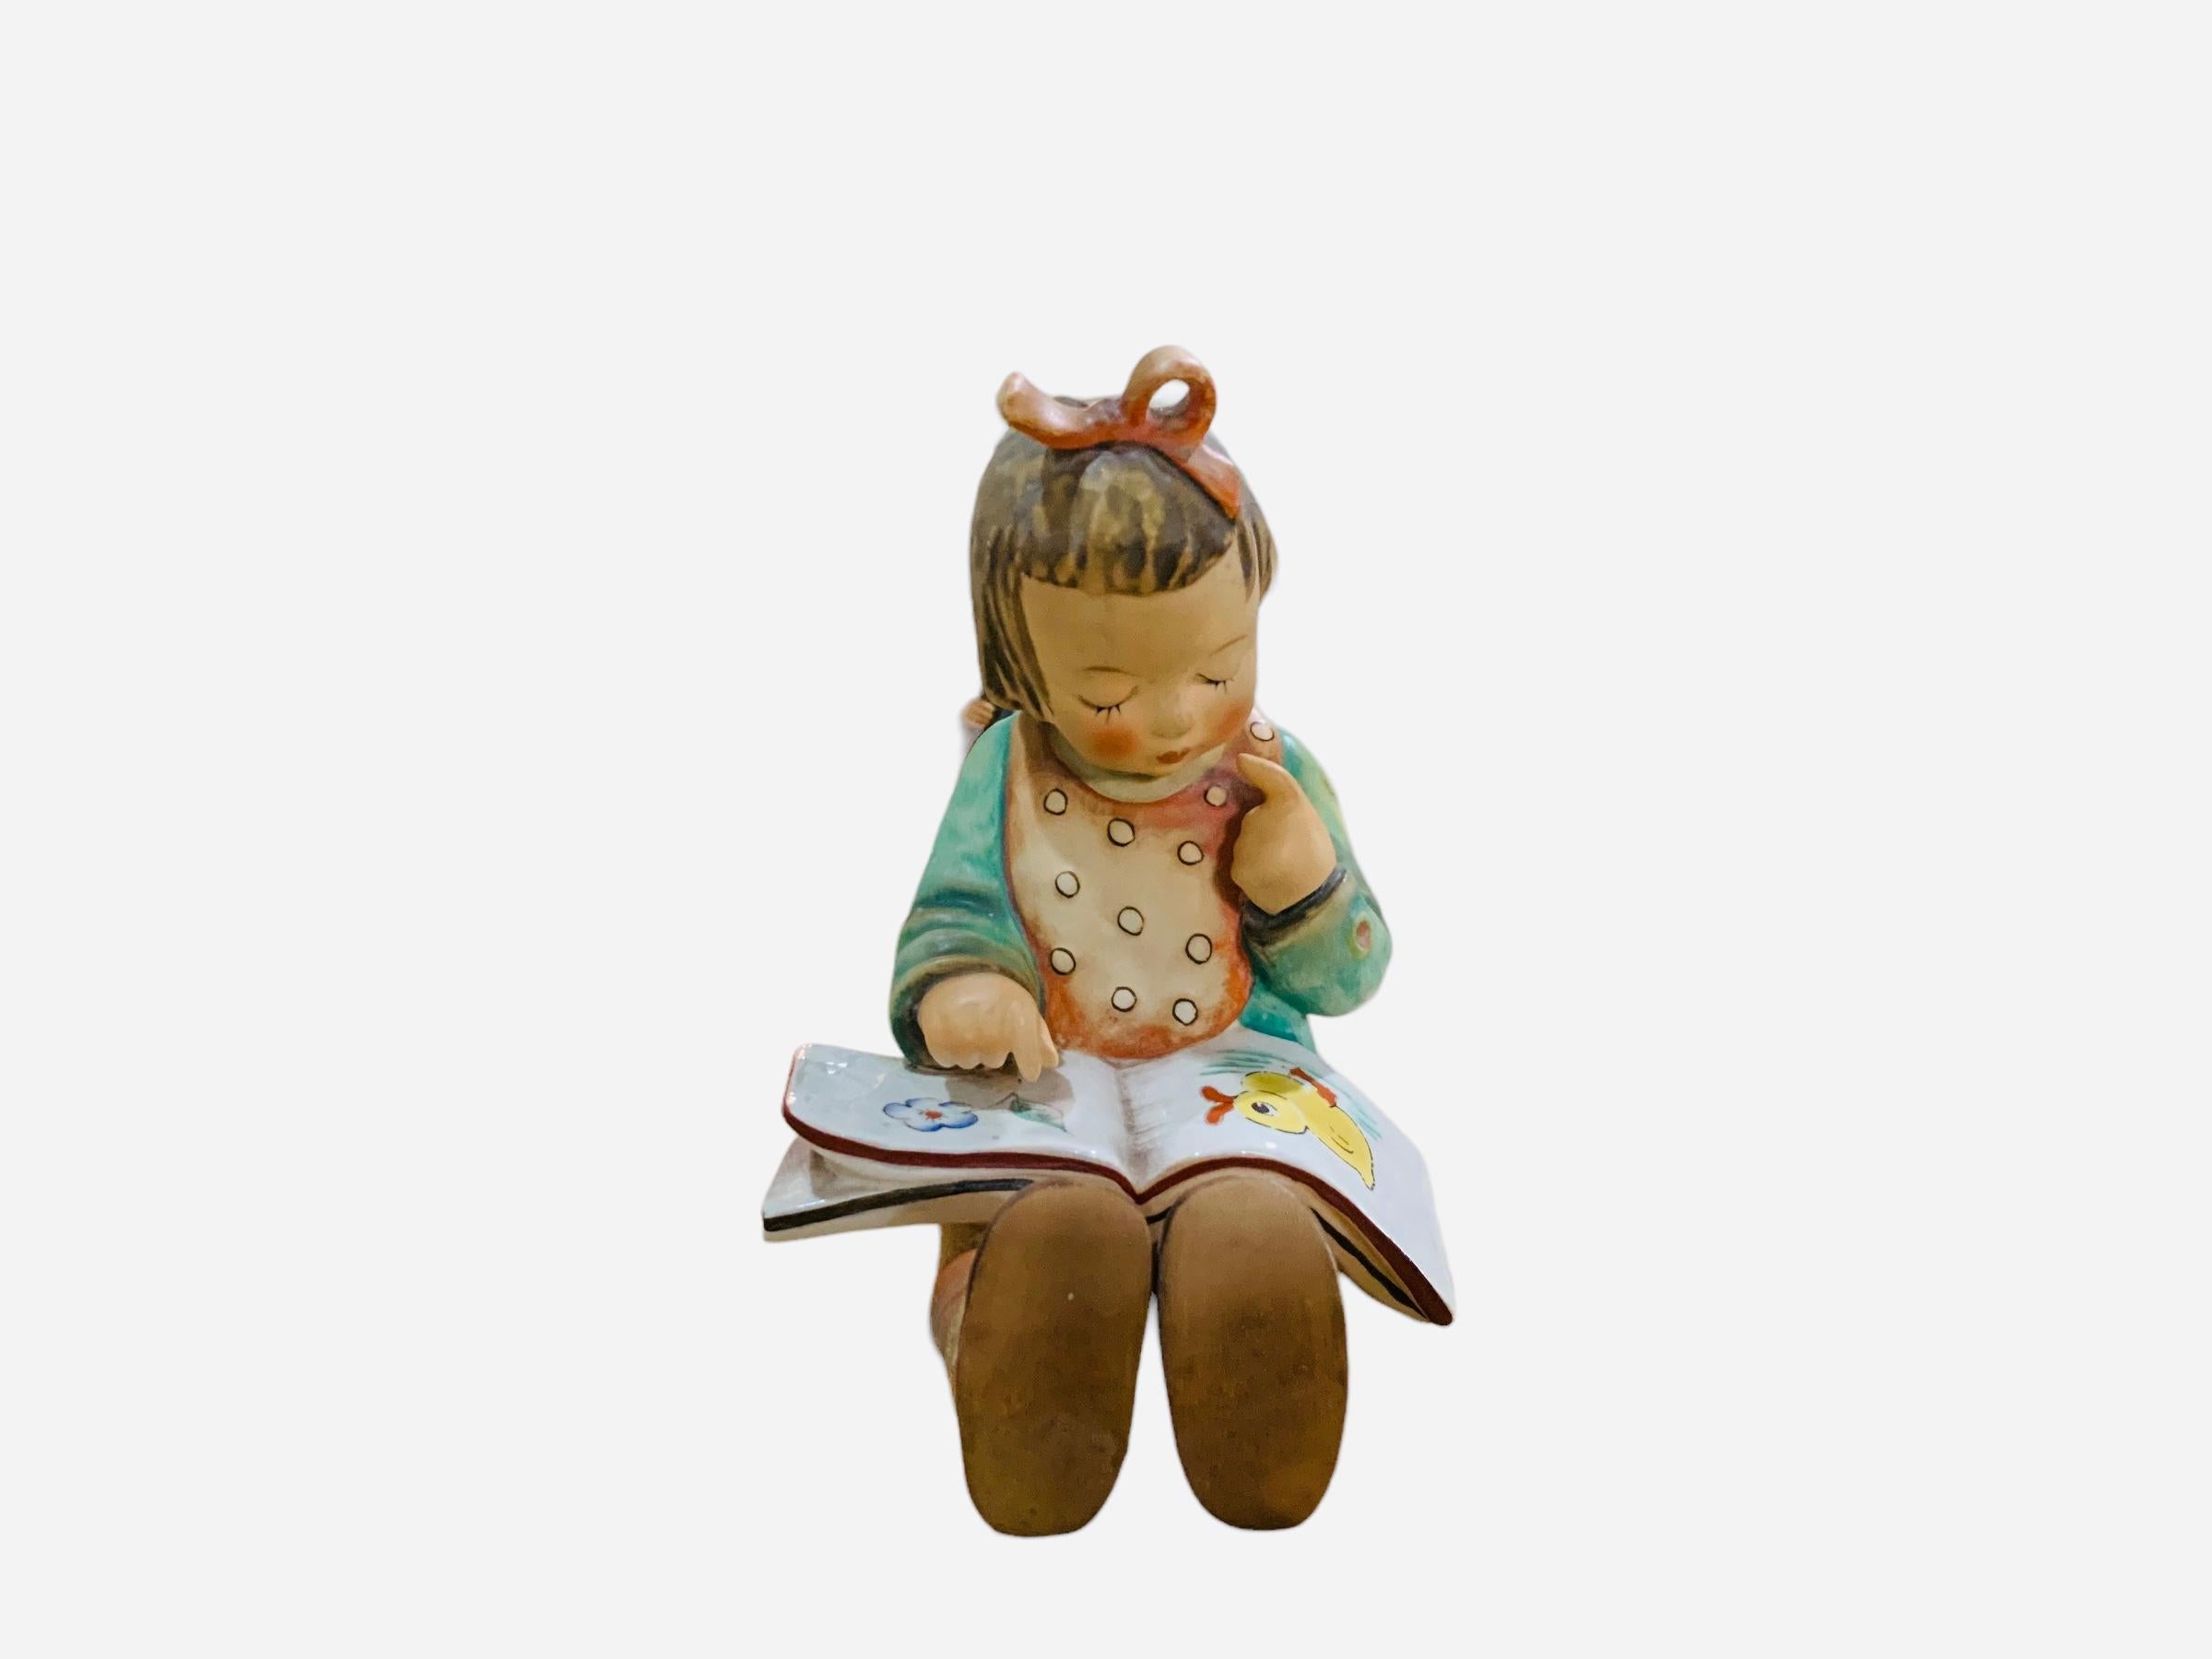 This is a Hummel porcelain figurine girl . It’s named “Reading Girl”. Its mark is TMK5 (1970’s). The trademark of Goebel company is below the base.